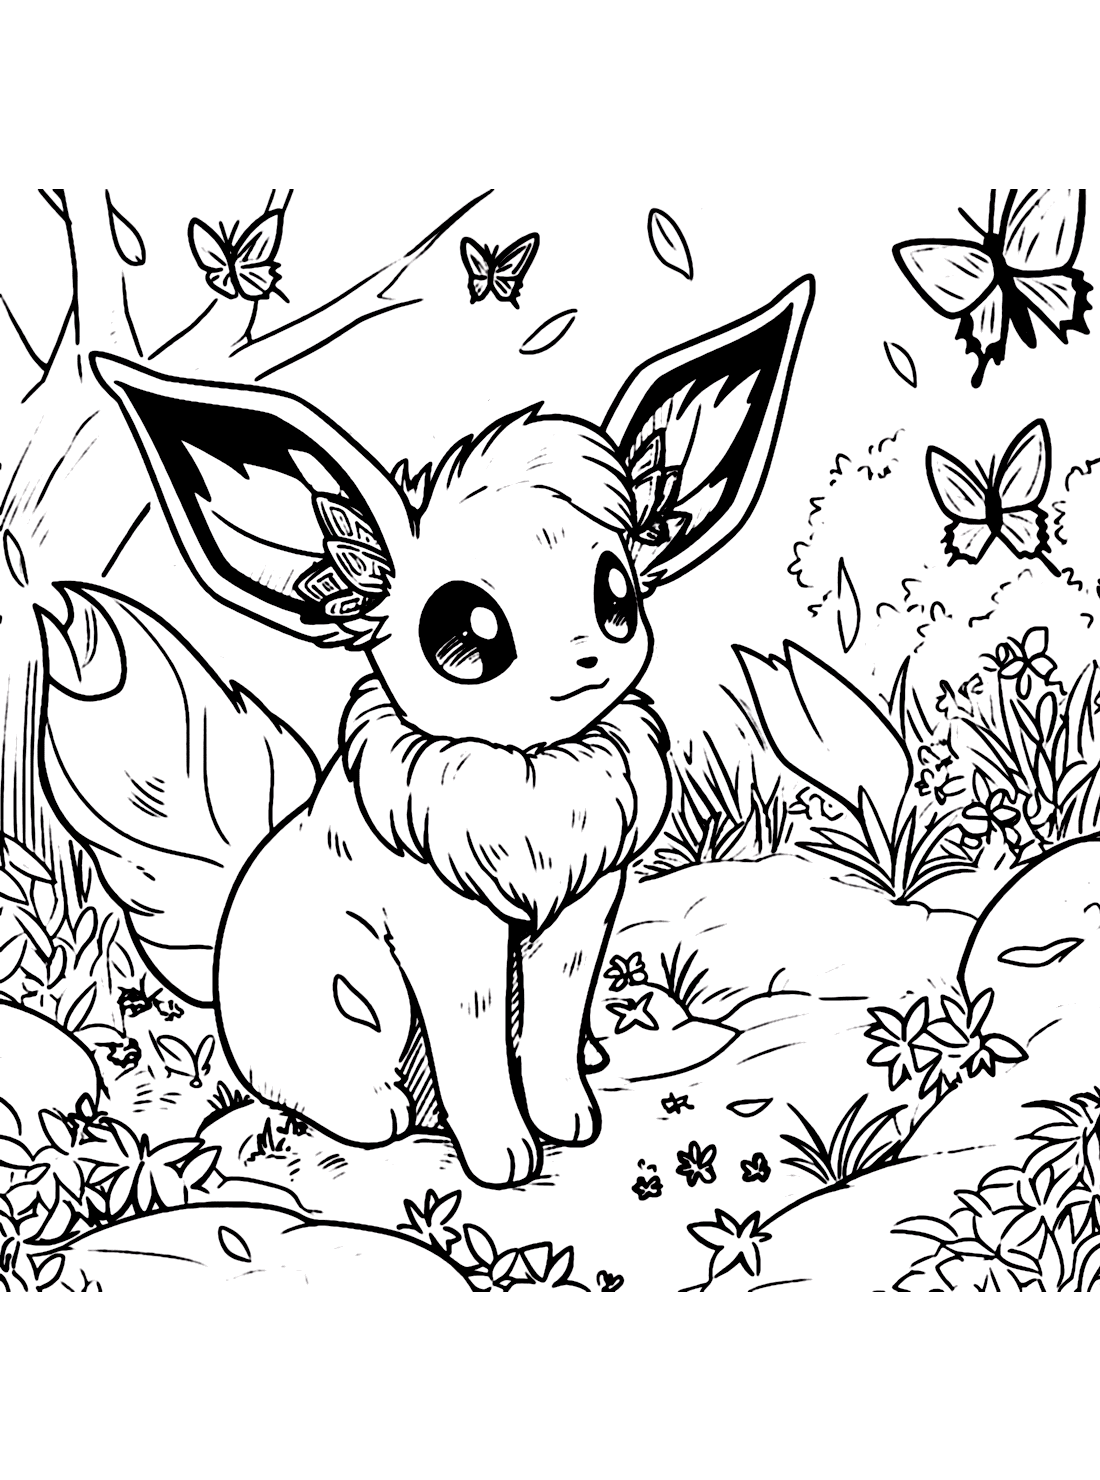 Glacieon Leafeon Coloring Page